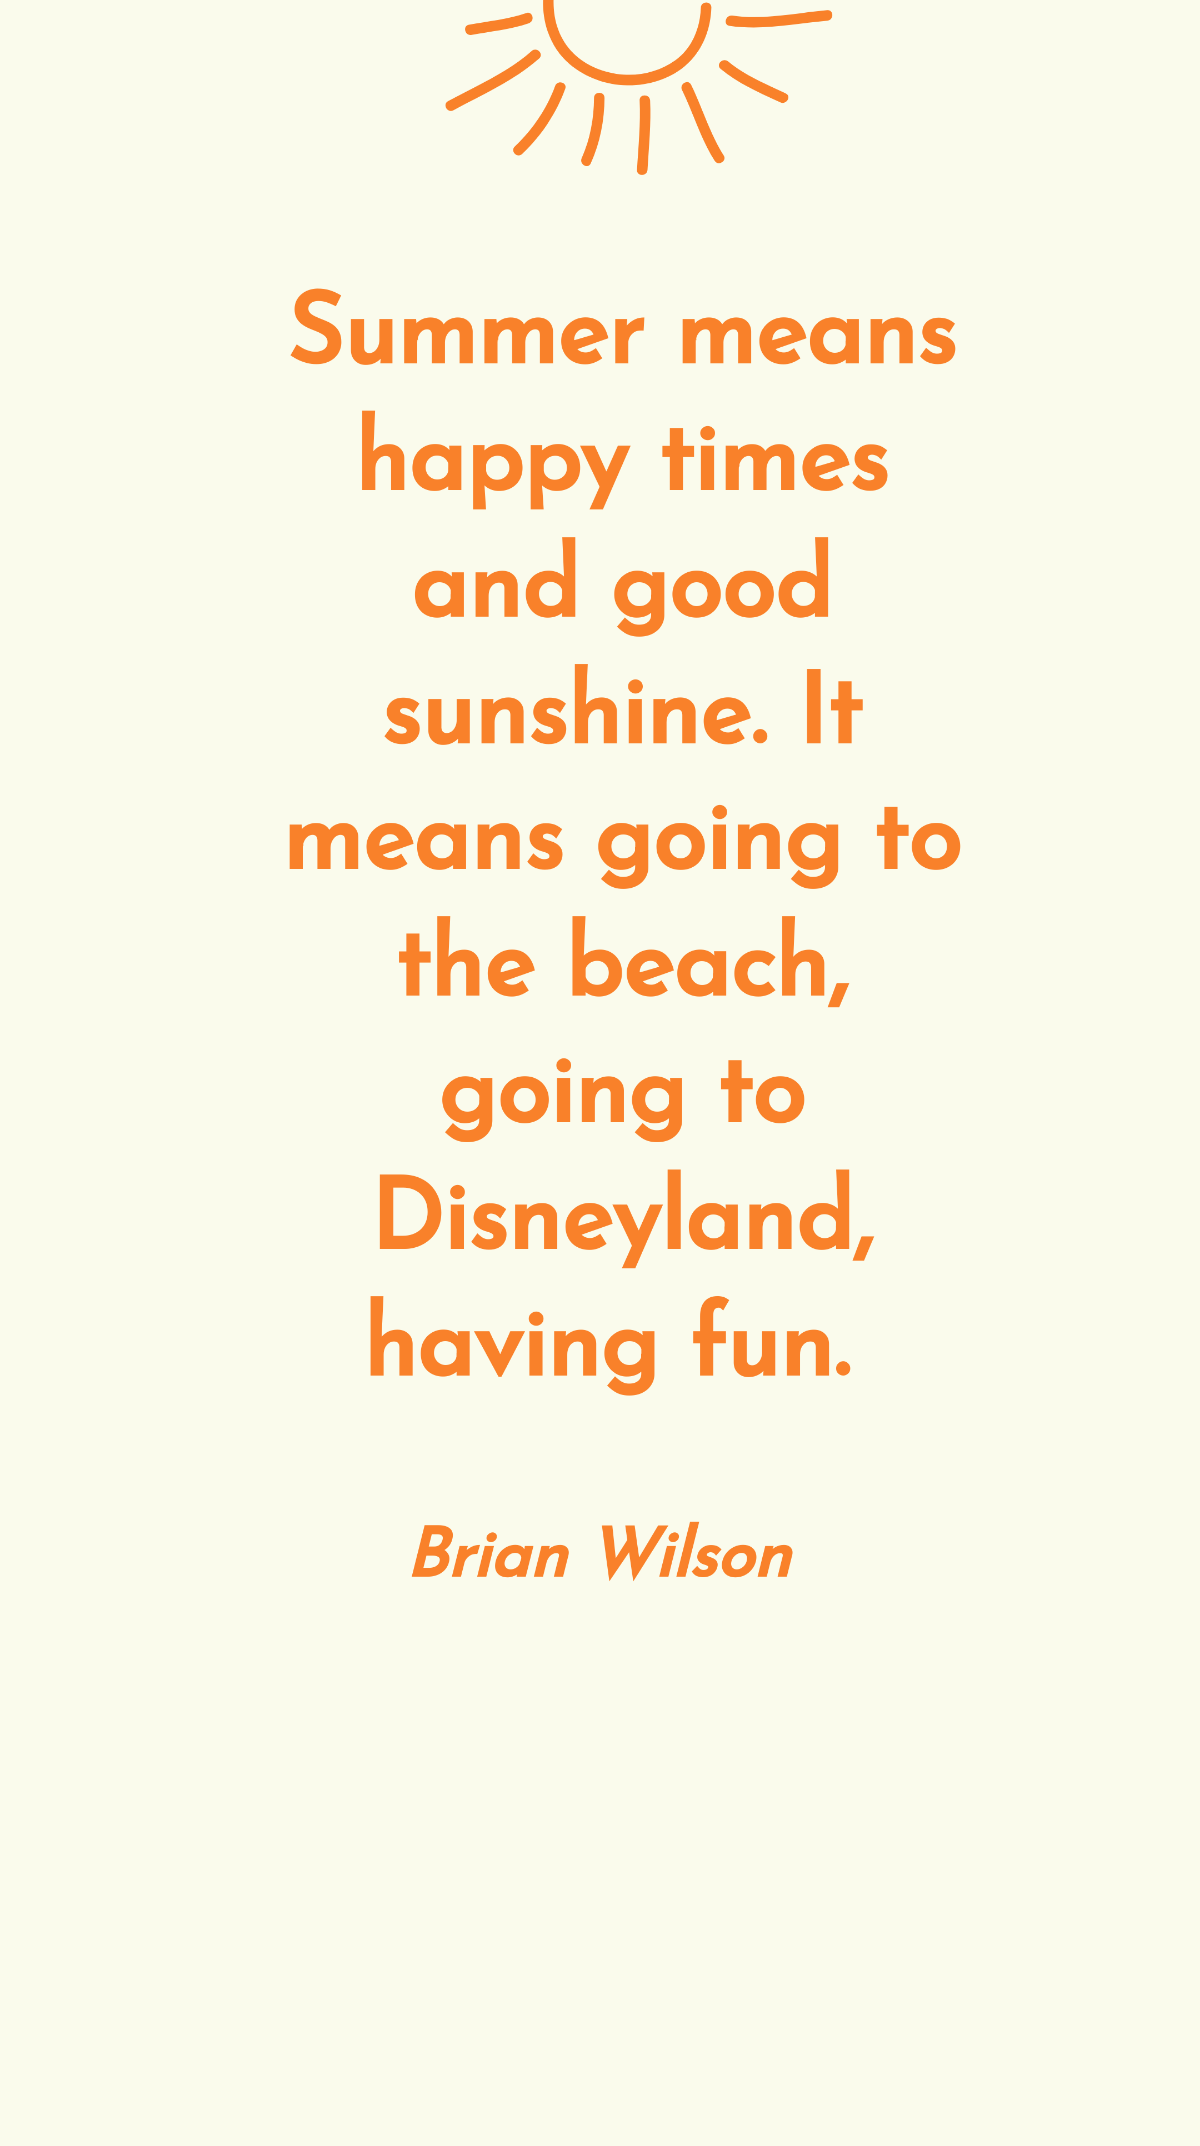 Brian Wilson - Summer means happy times and good sunshine. It means going to the beach, going to Disneyland, having fun.